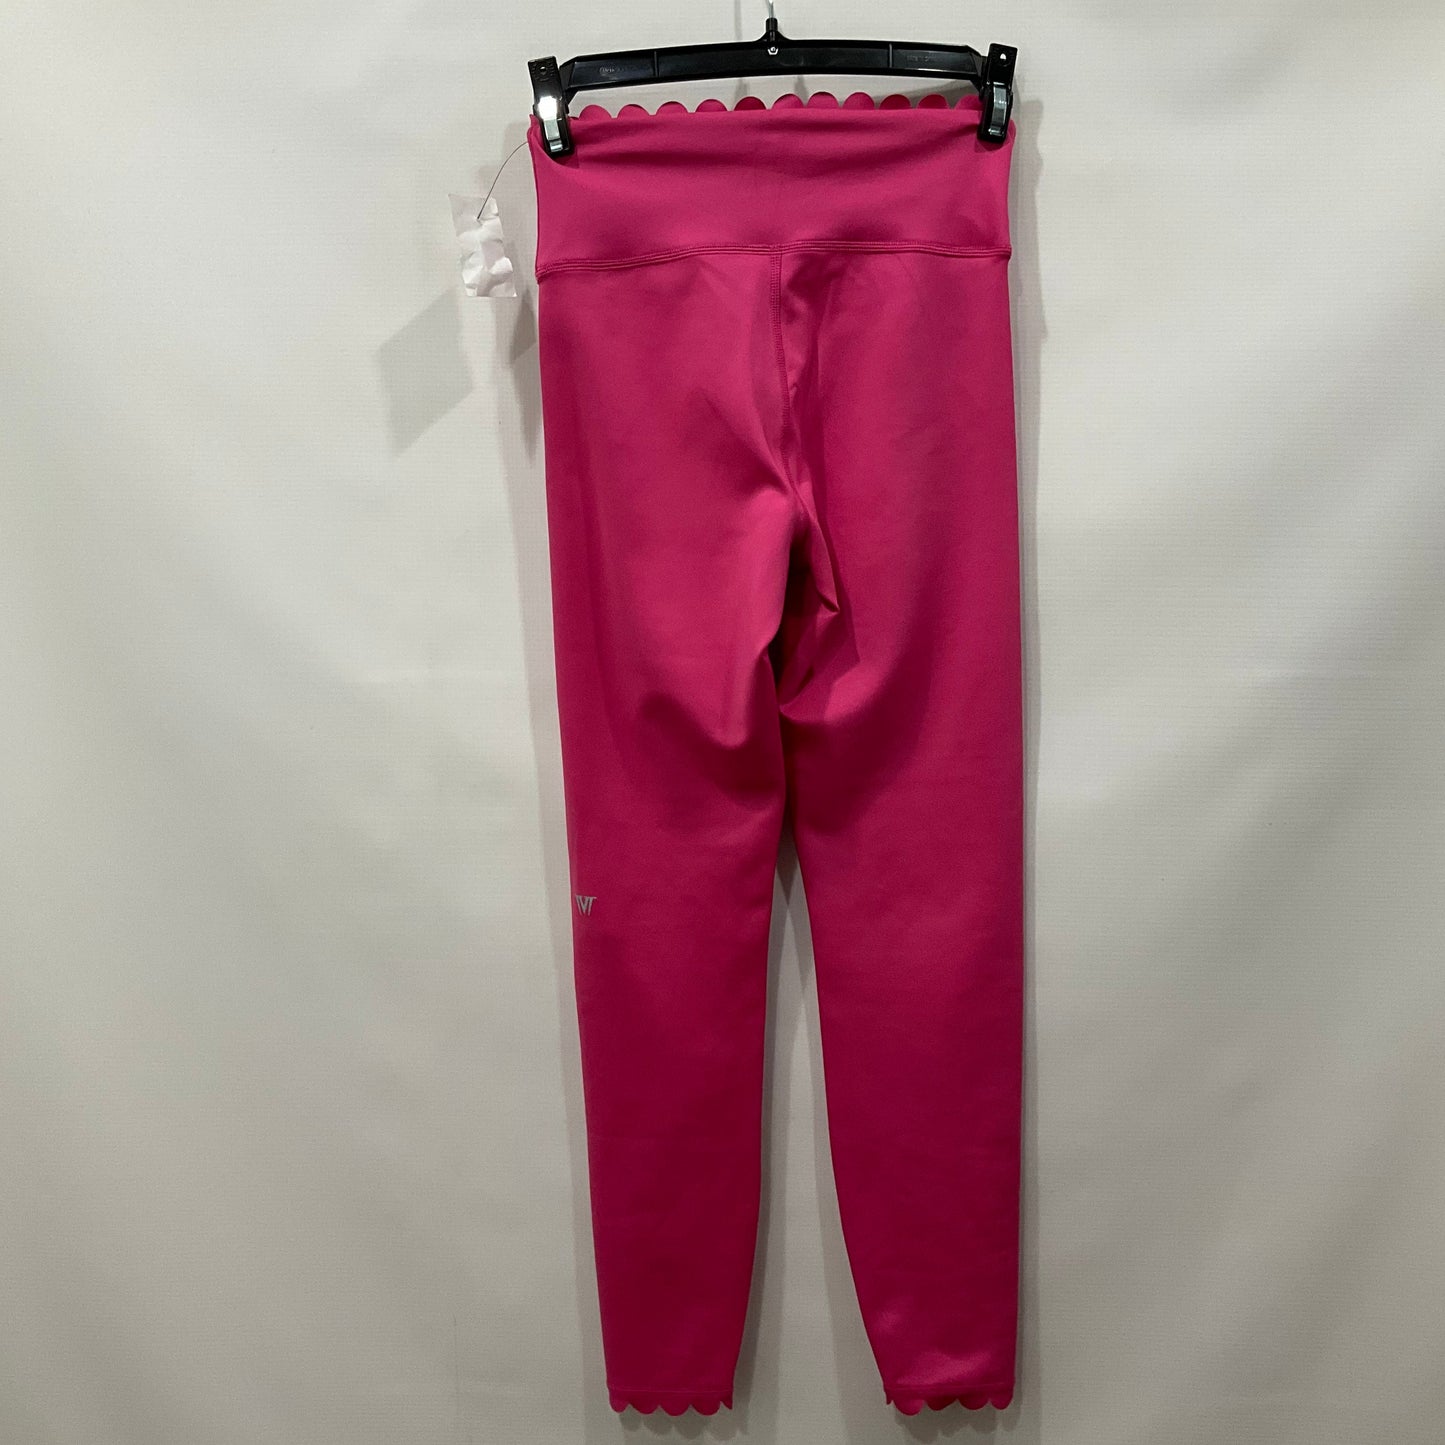 Pink Athletic Leggings Ivl Collective, Size 2